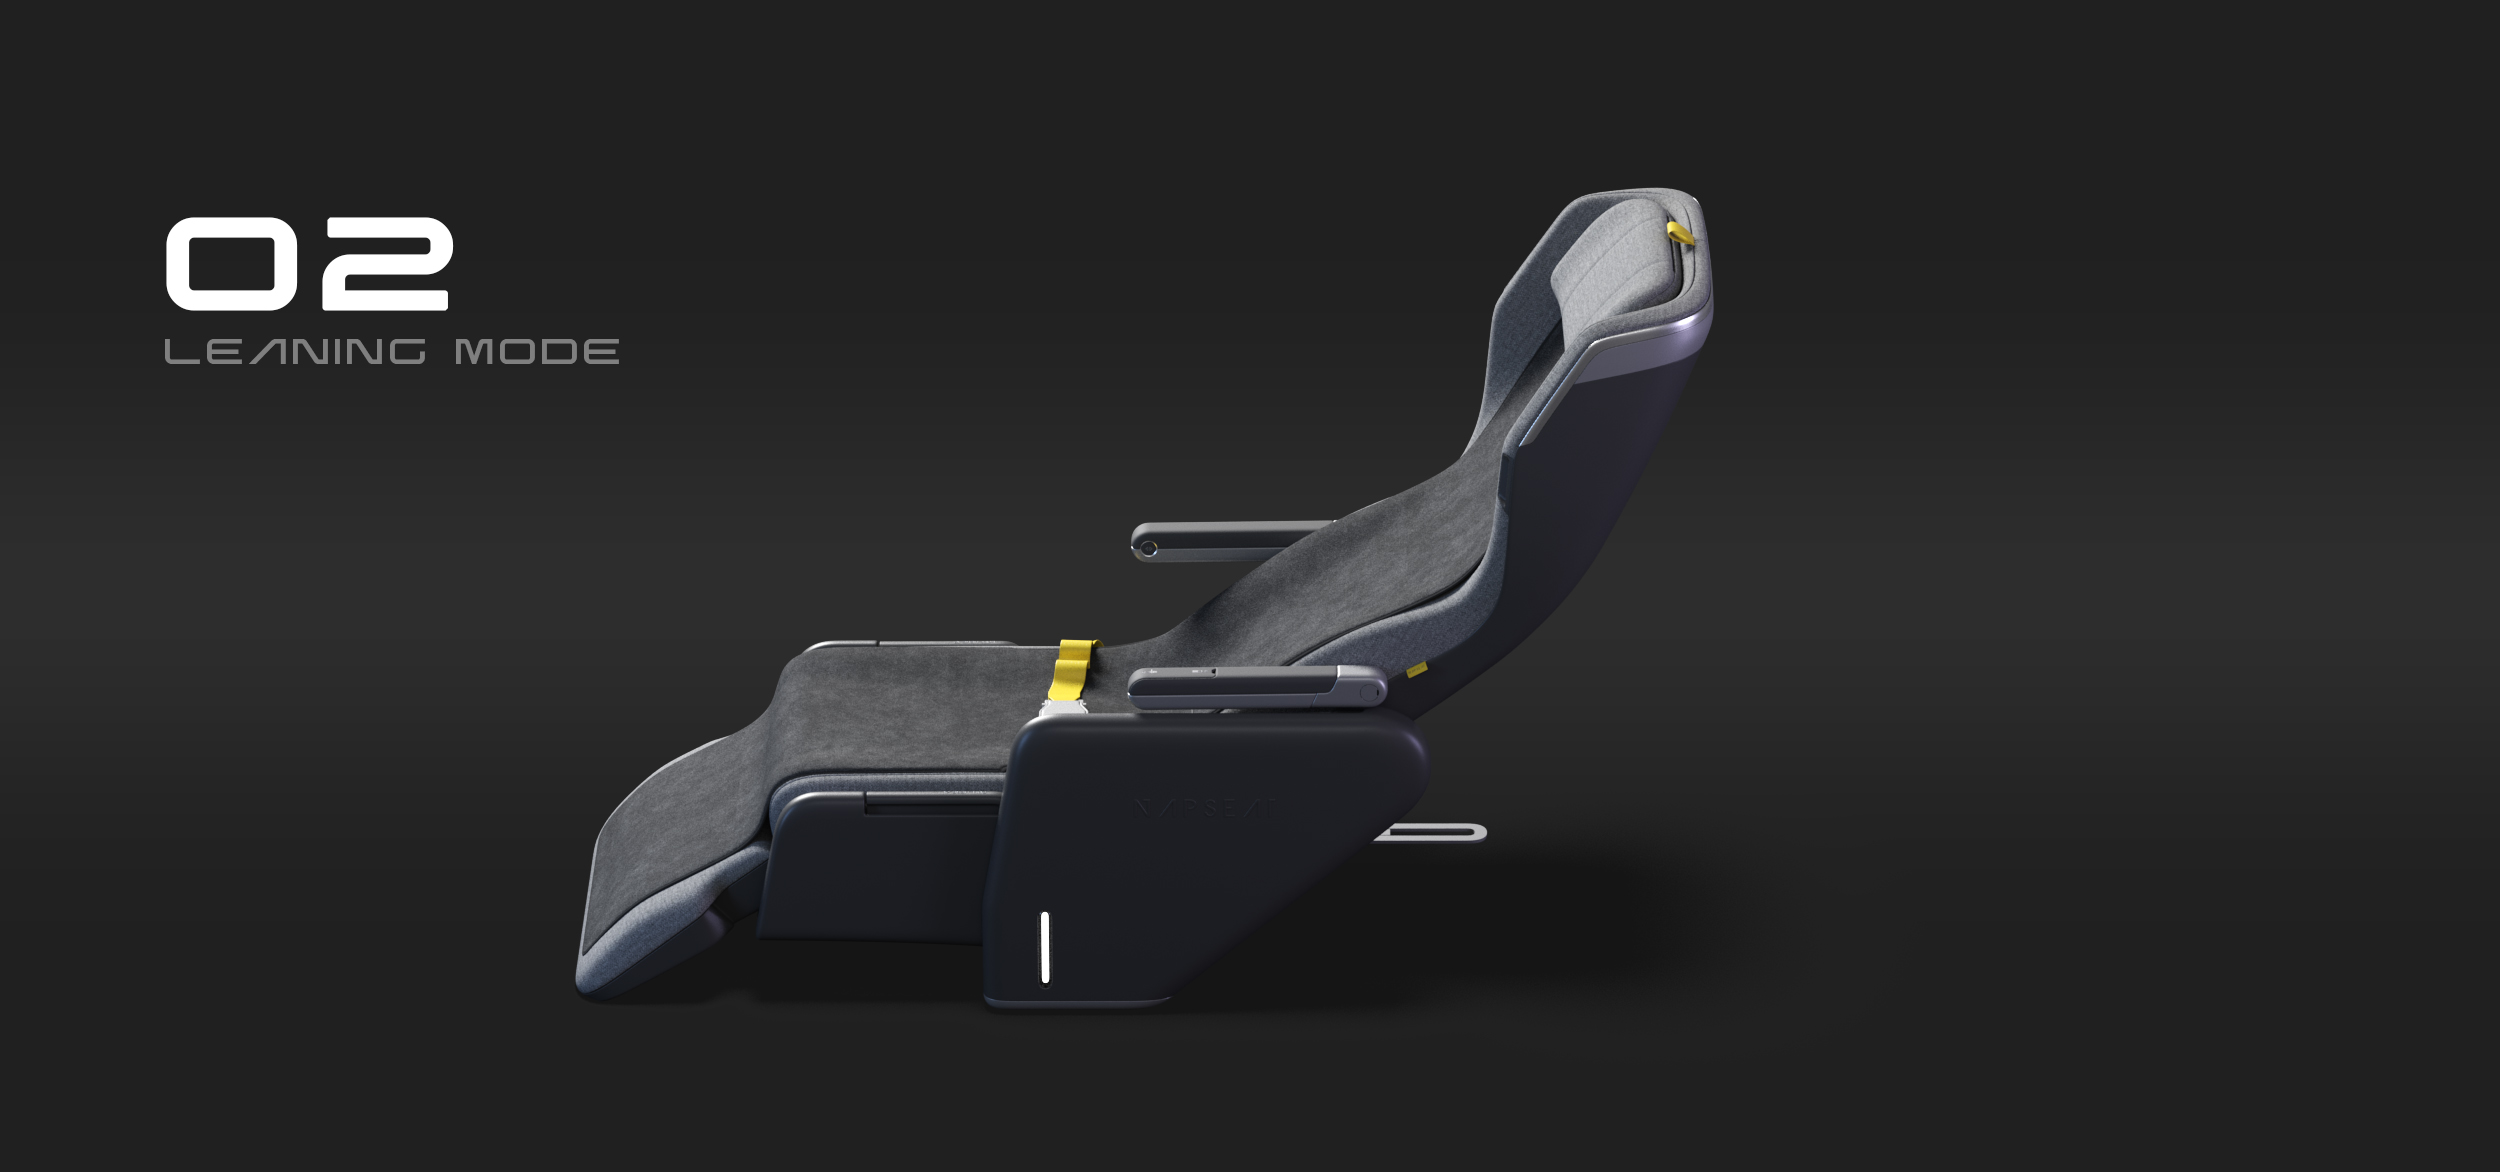 Napseat project